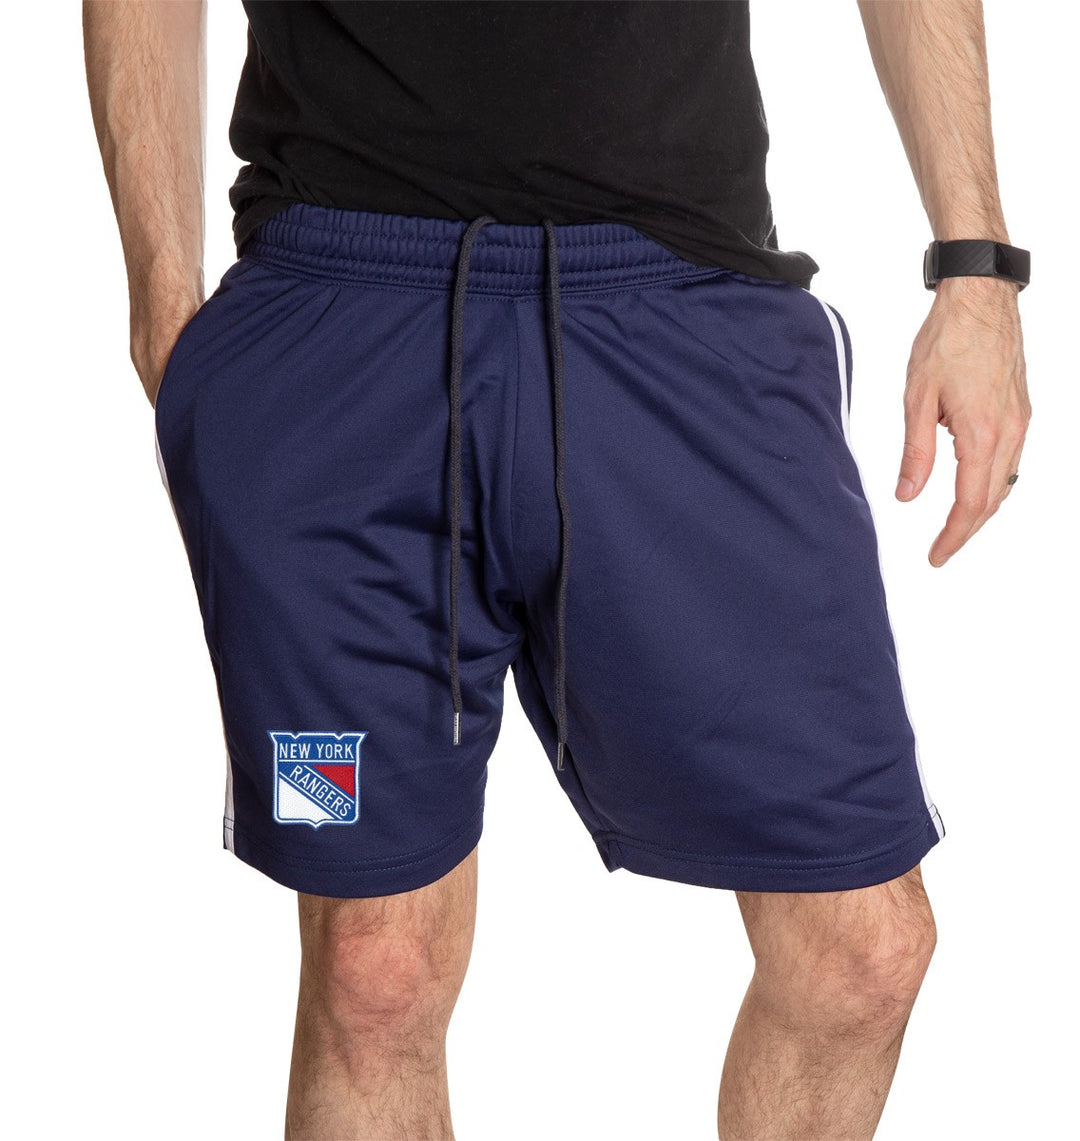 NHL Mens Official Team Two-Stripe Shorts- New York Rangers  Full Front View Of Man Wearing Shorts WIth Hand In Pocket 